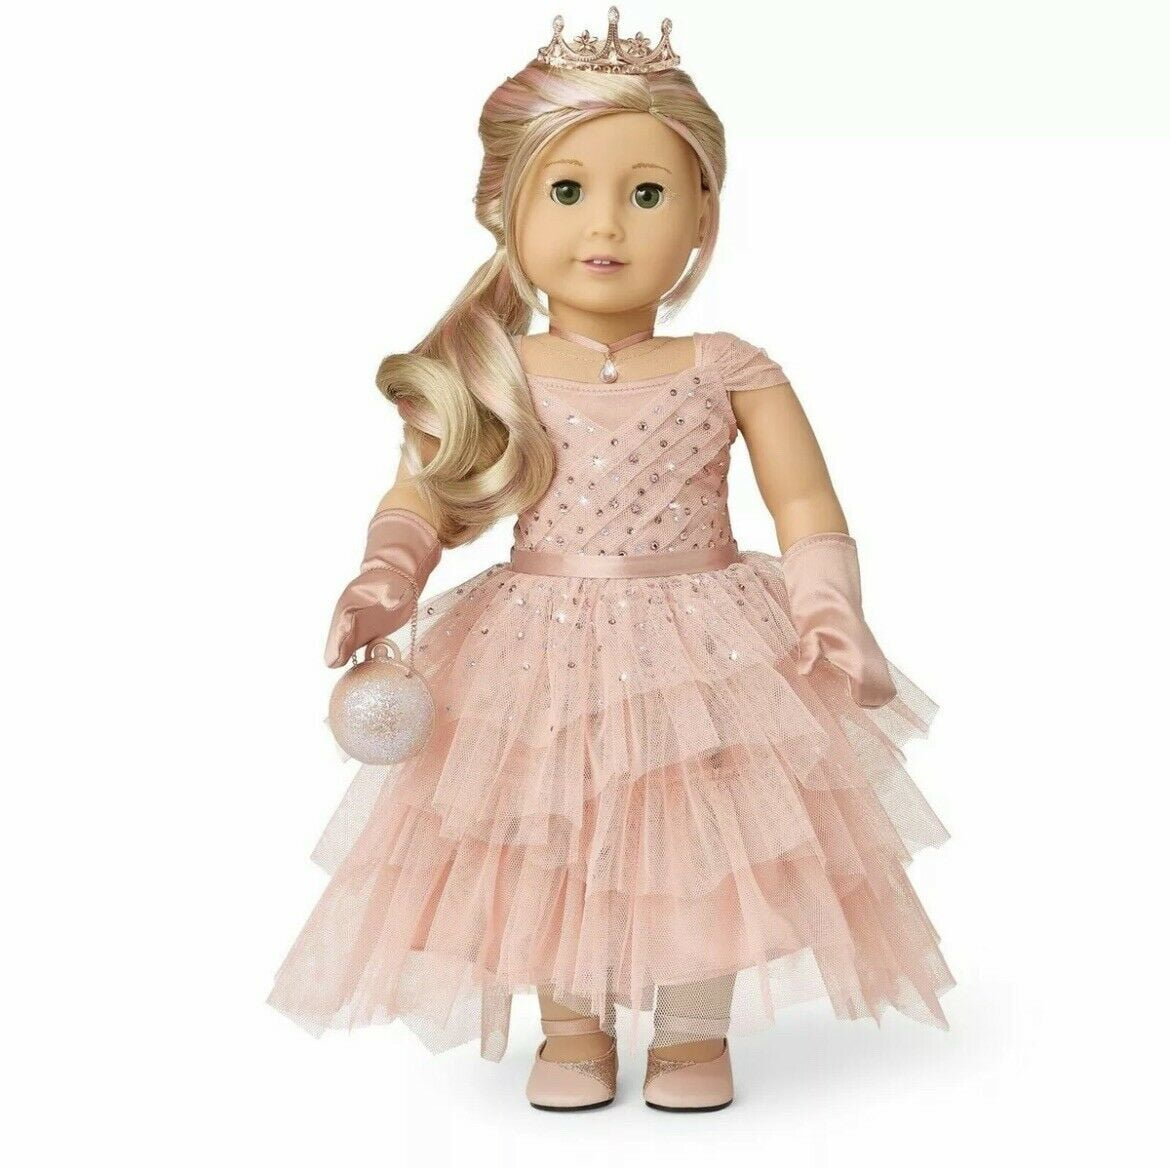 American Girl 2021 Limited Edition Winter Princess 18 Inch Blonde Doll